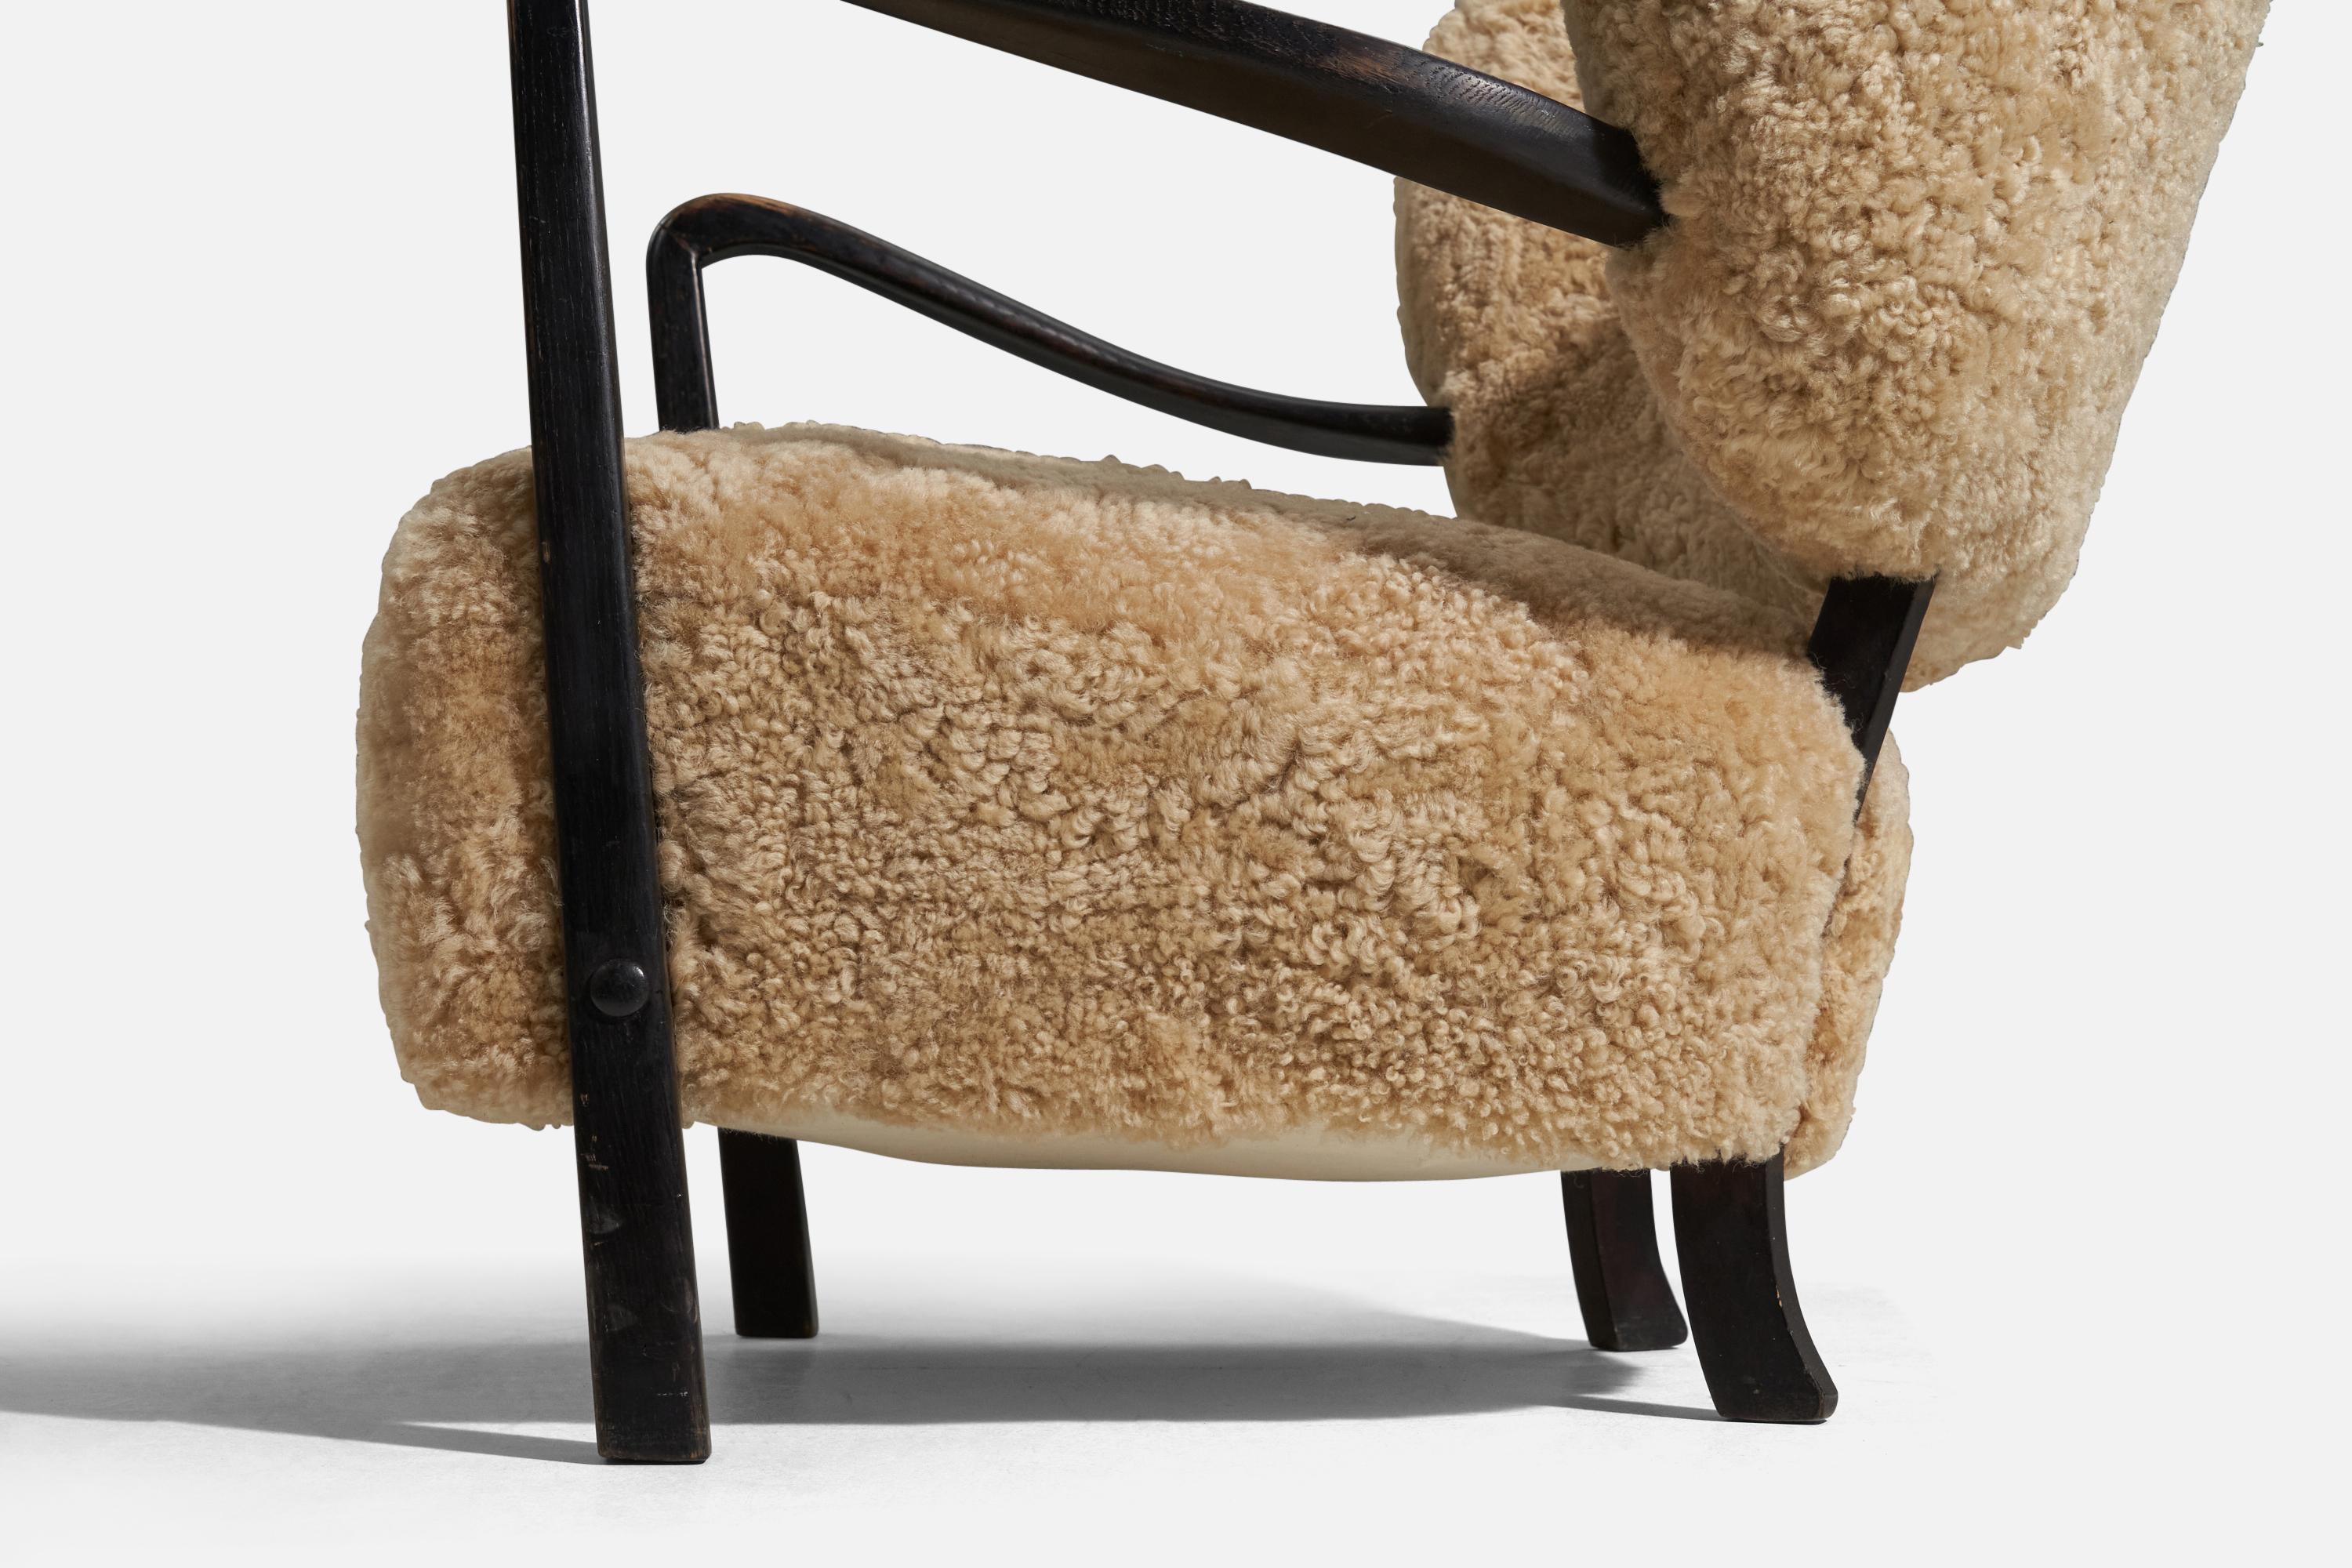 Danish Viggo Boesen 'Attributed' Lounge Chair, Stained Wood, Shearling, Denmark, 1940s